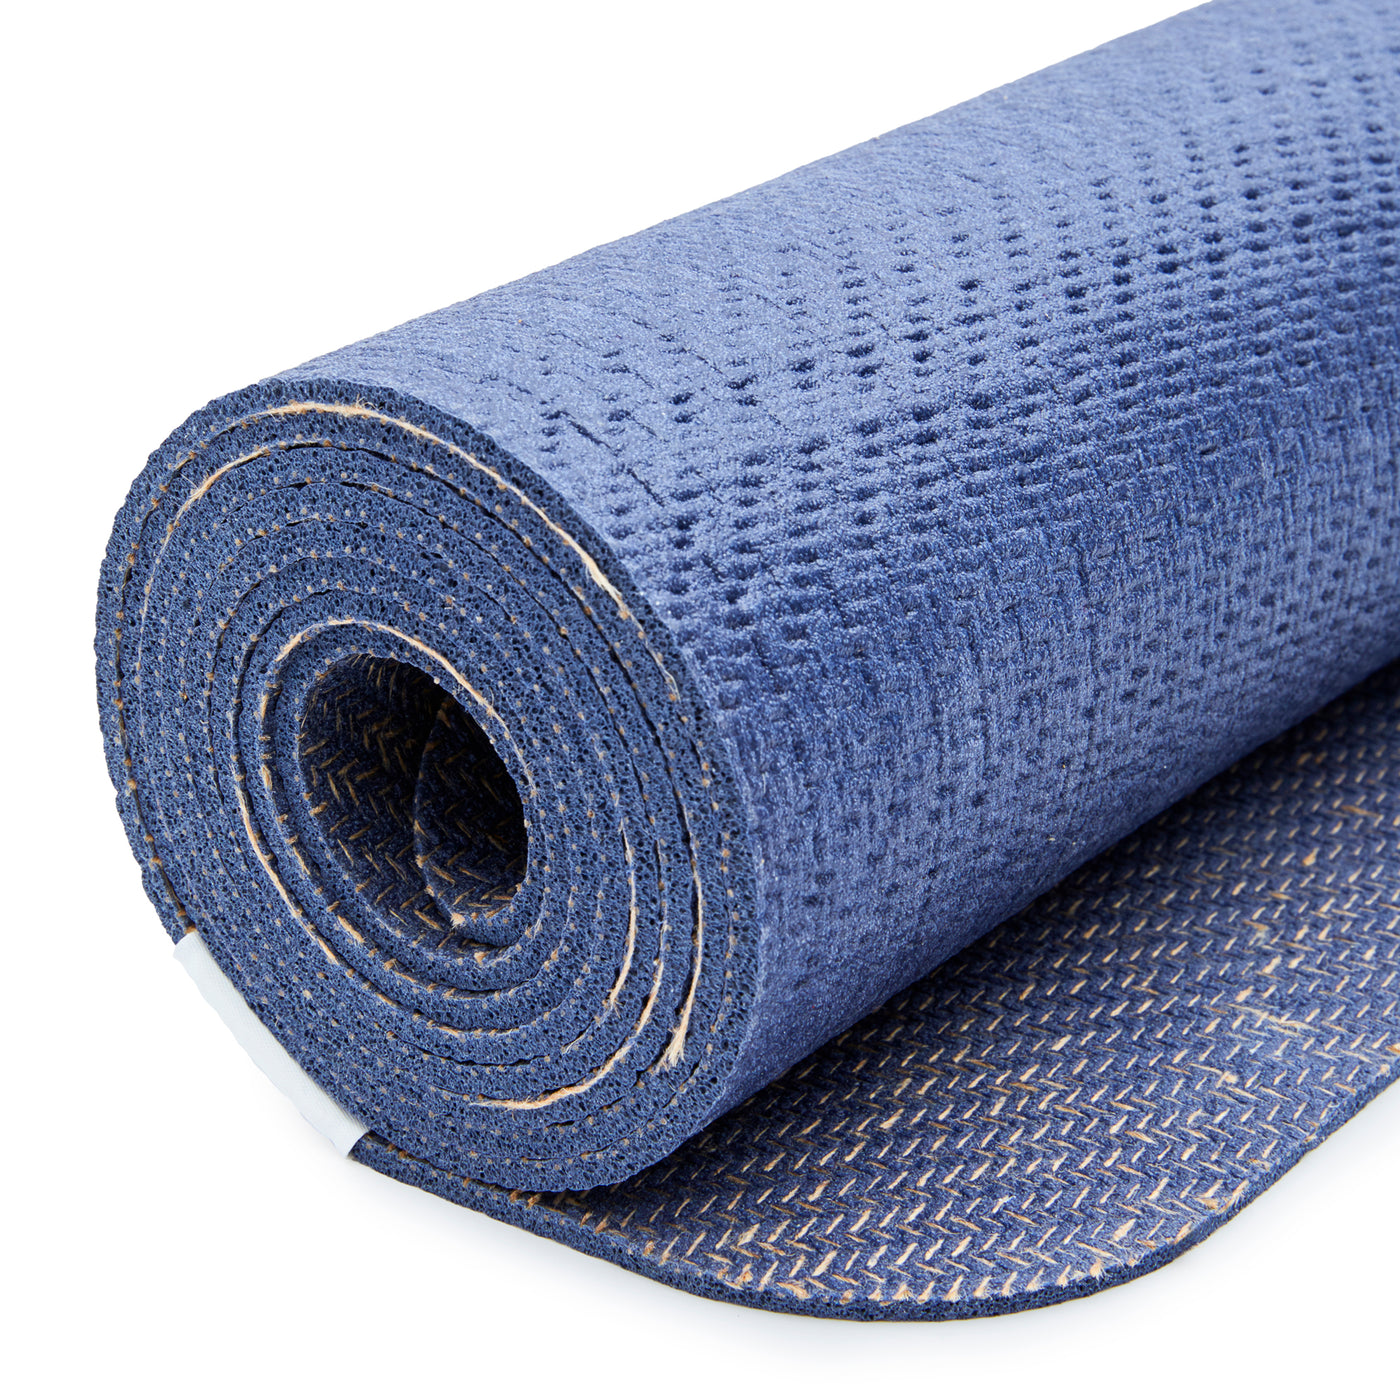 Grip Rubberised Yoga Mat - Welcome to Grip yoga